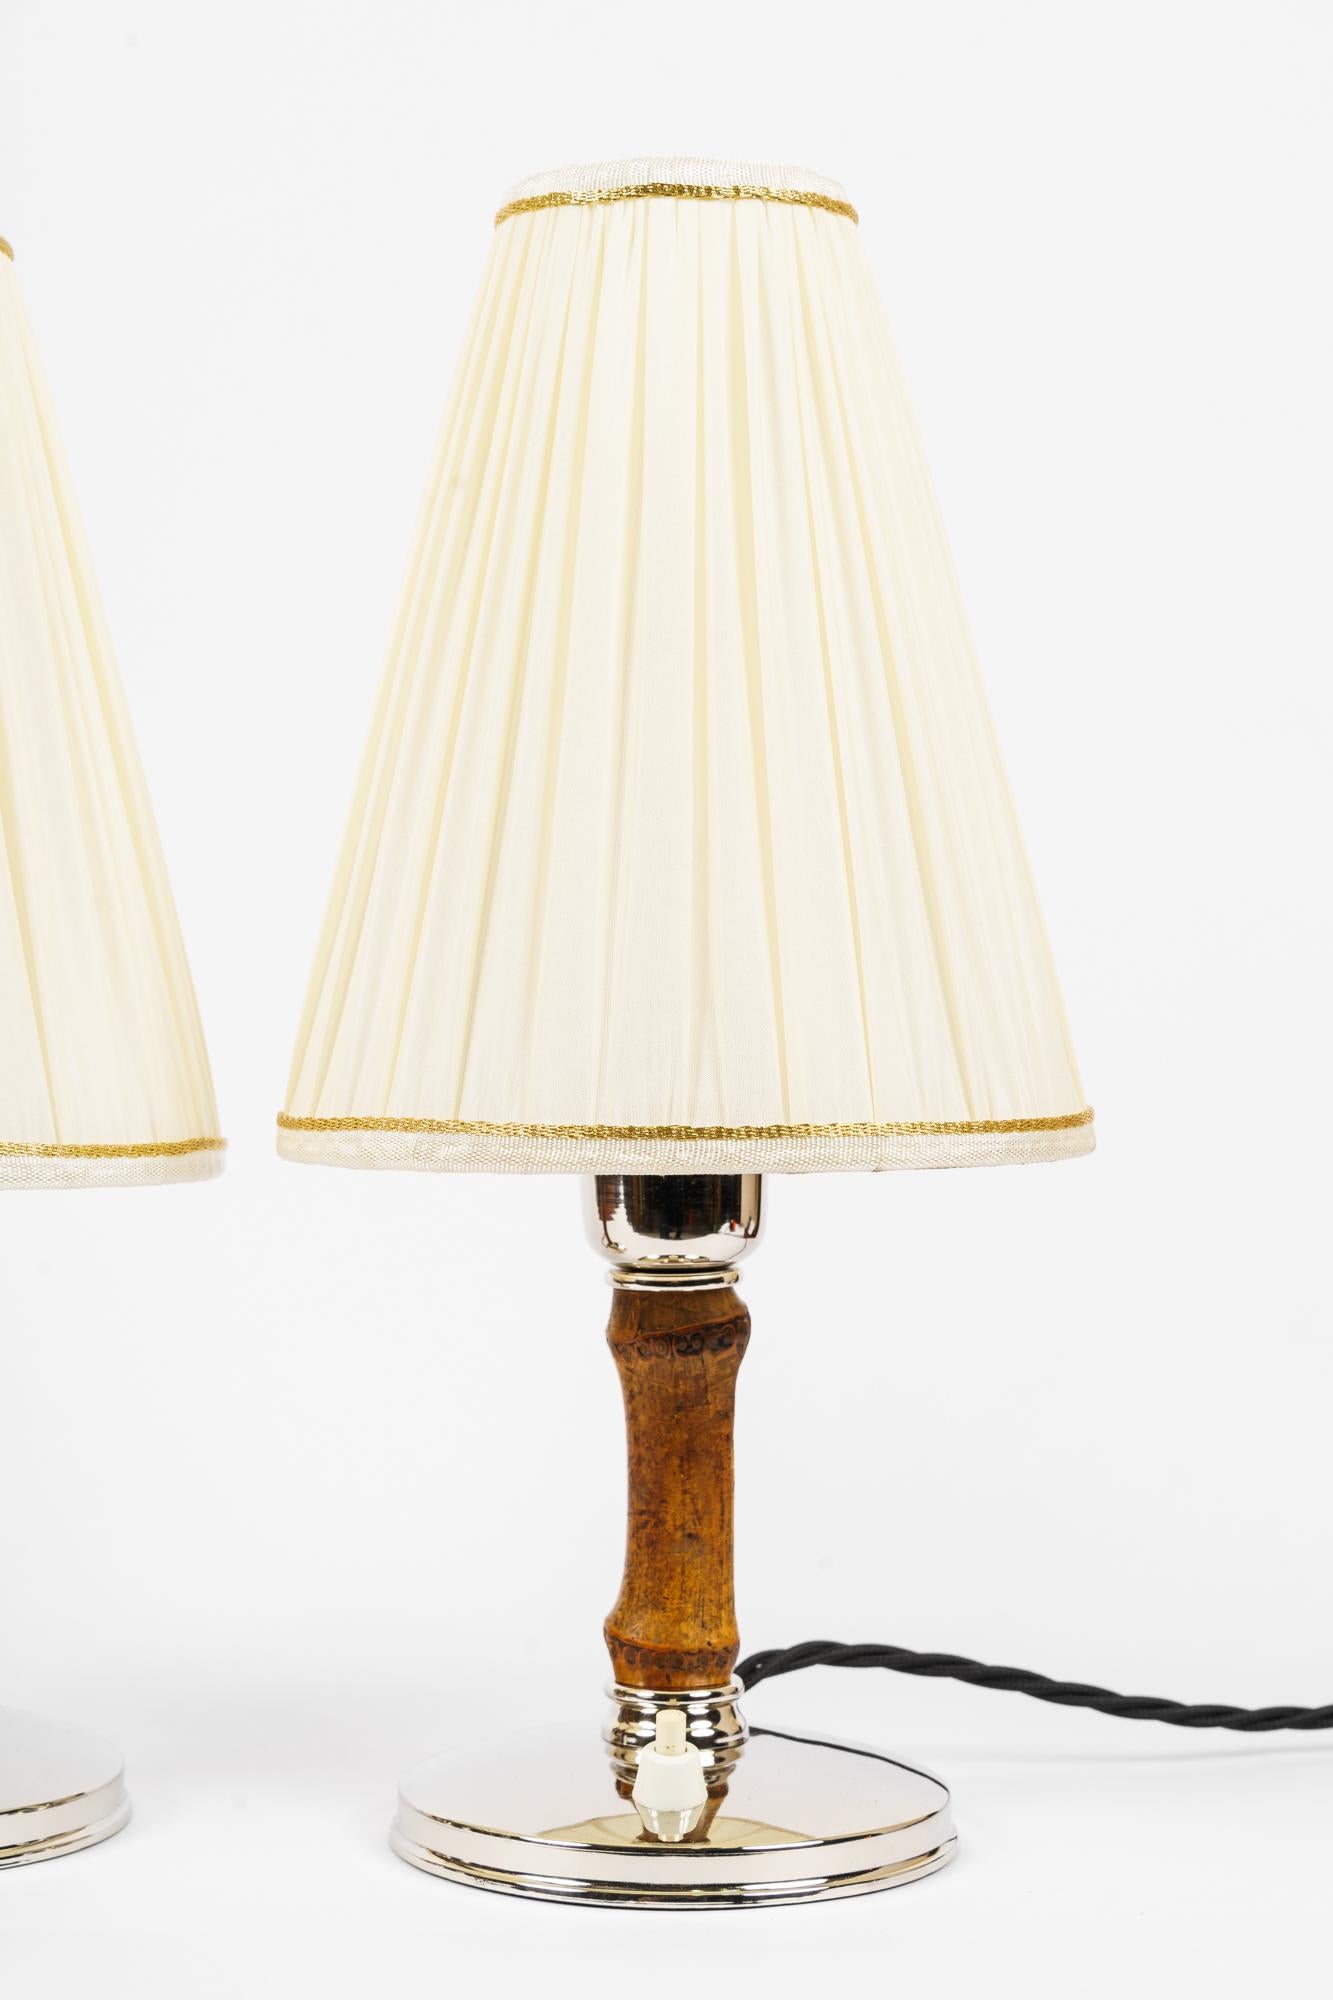 2 Rupert Nikoll Table lamps vienna around 1950s
The shades are replaced ( new ).